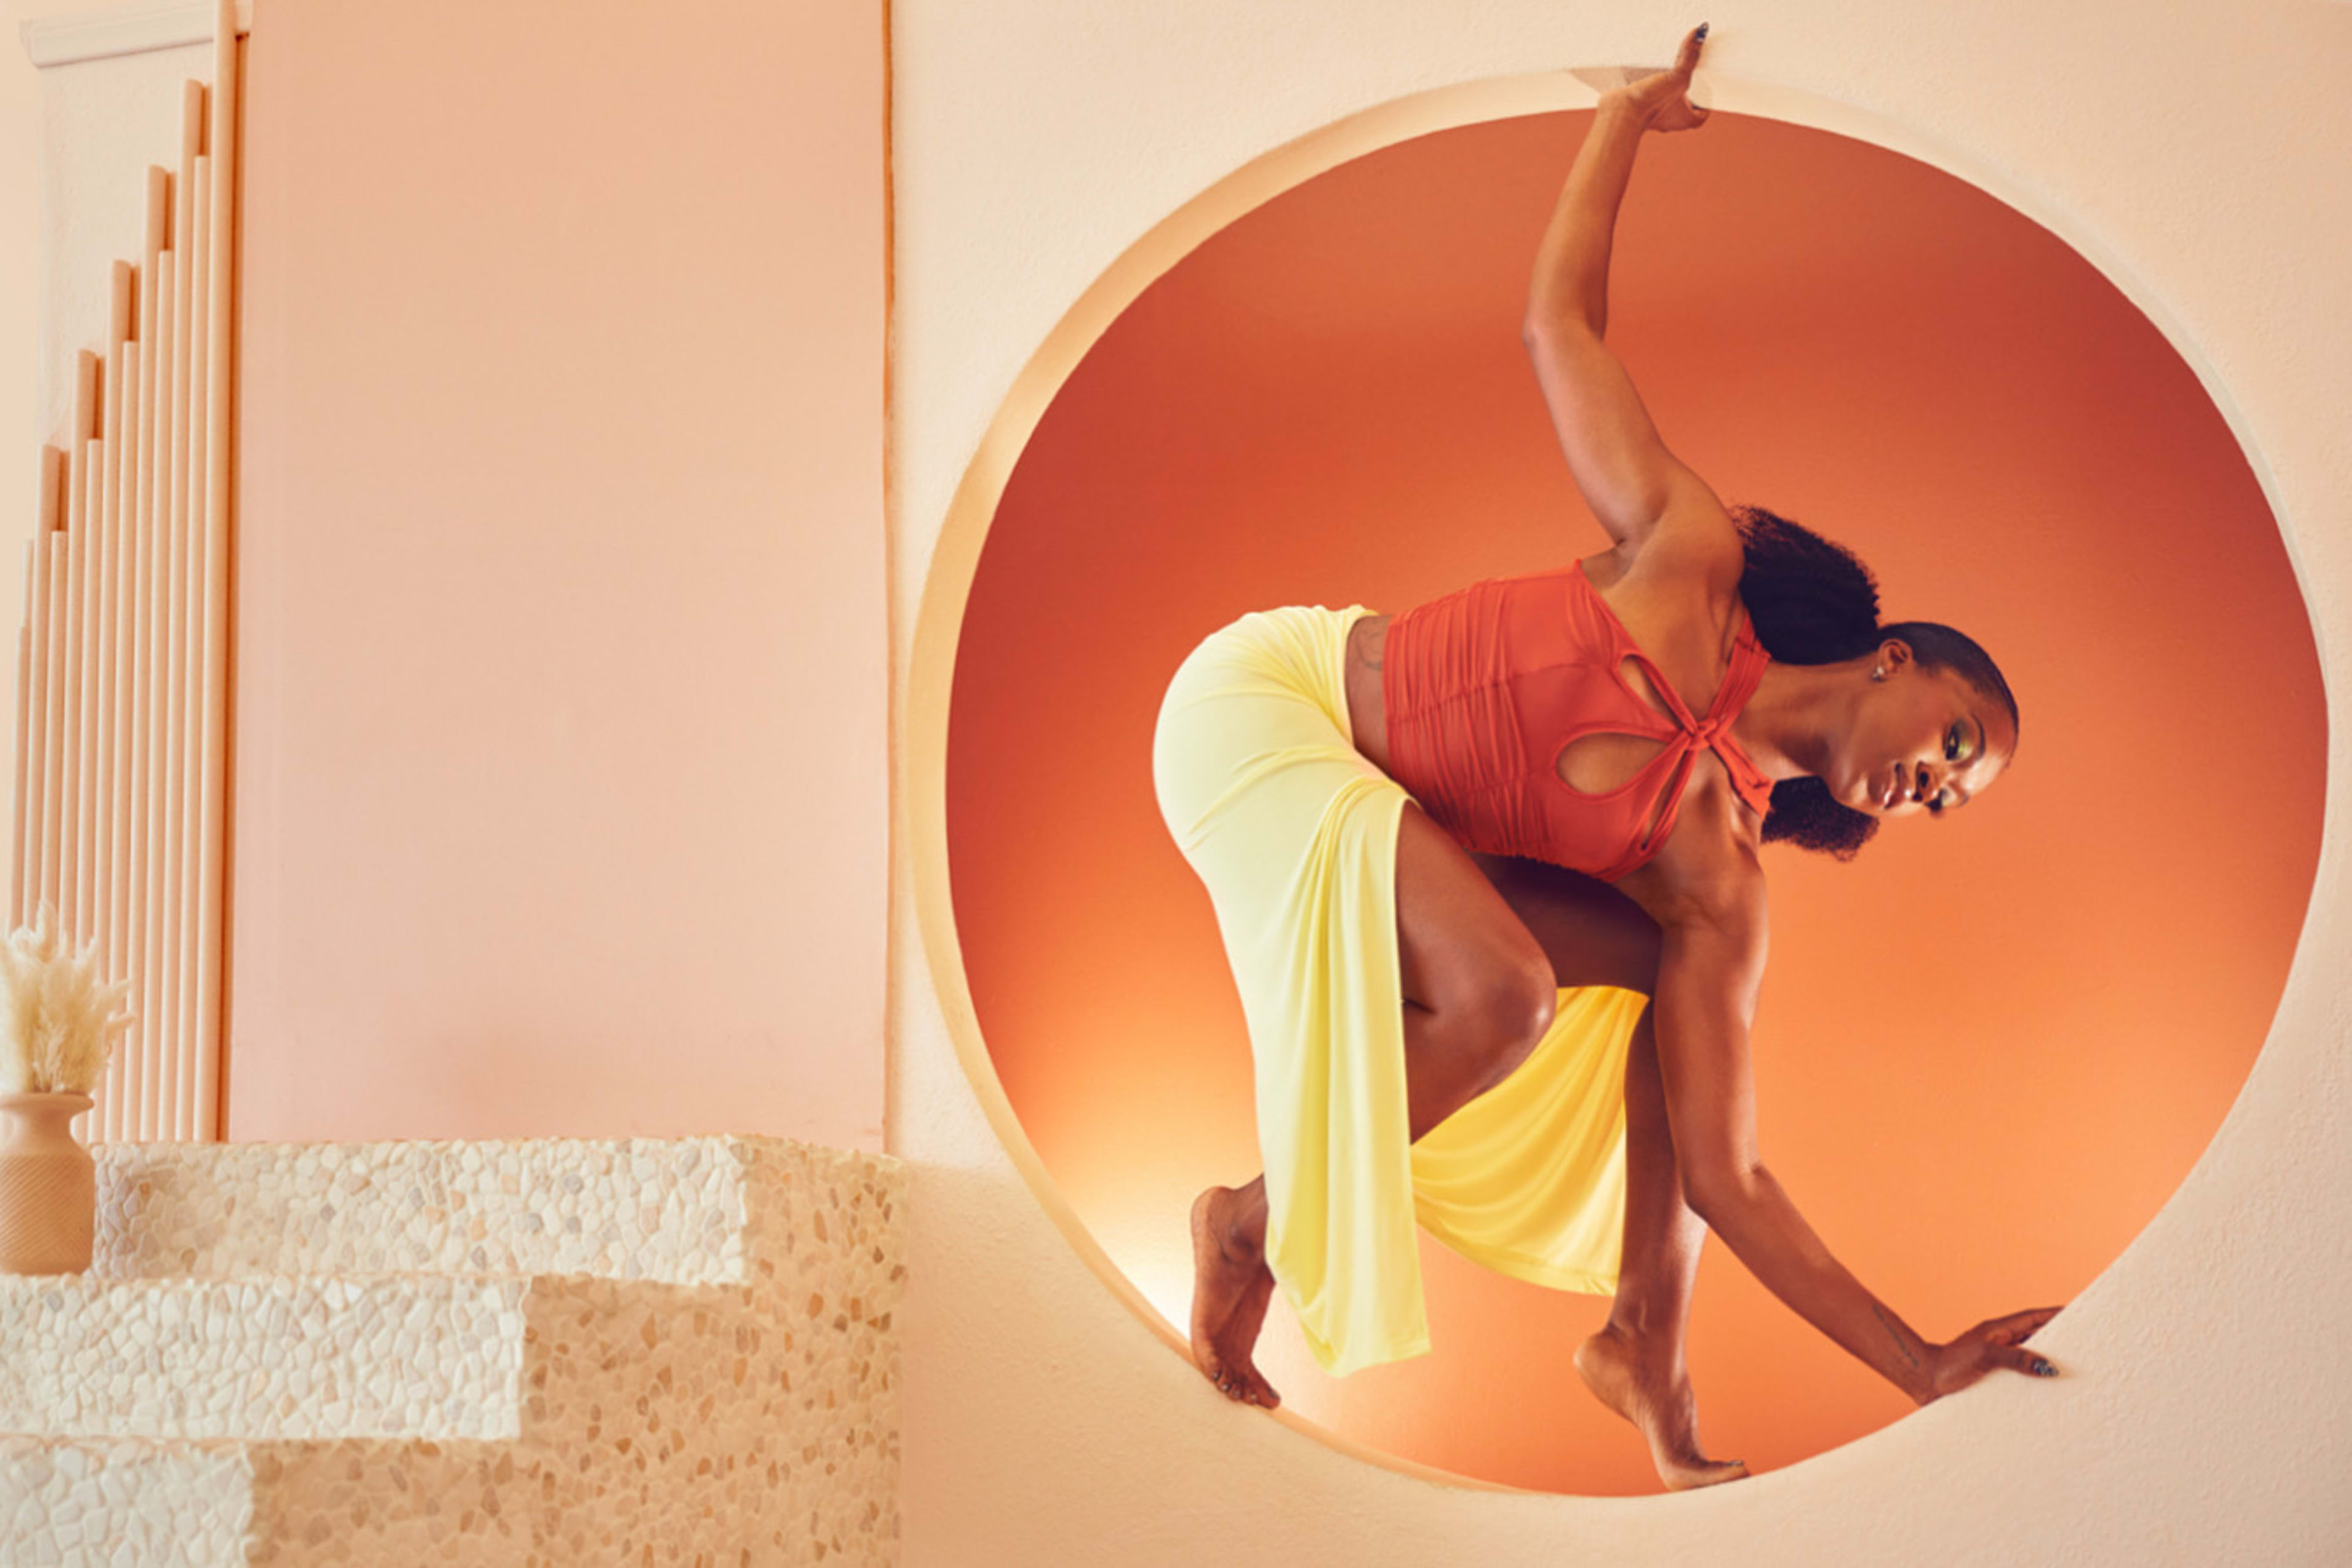 A woman is posing in a circular window during an orange and beige photoshoot.